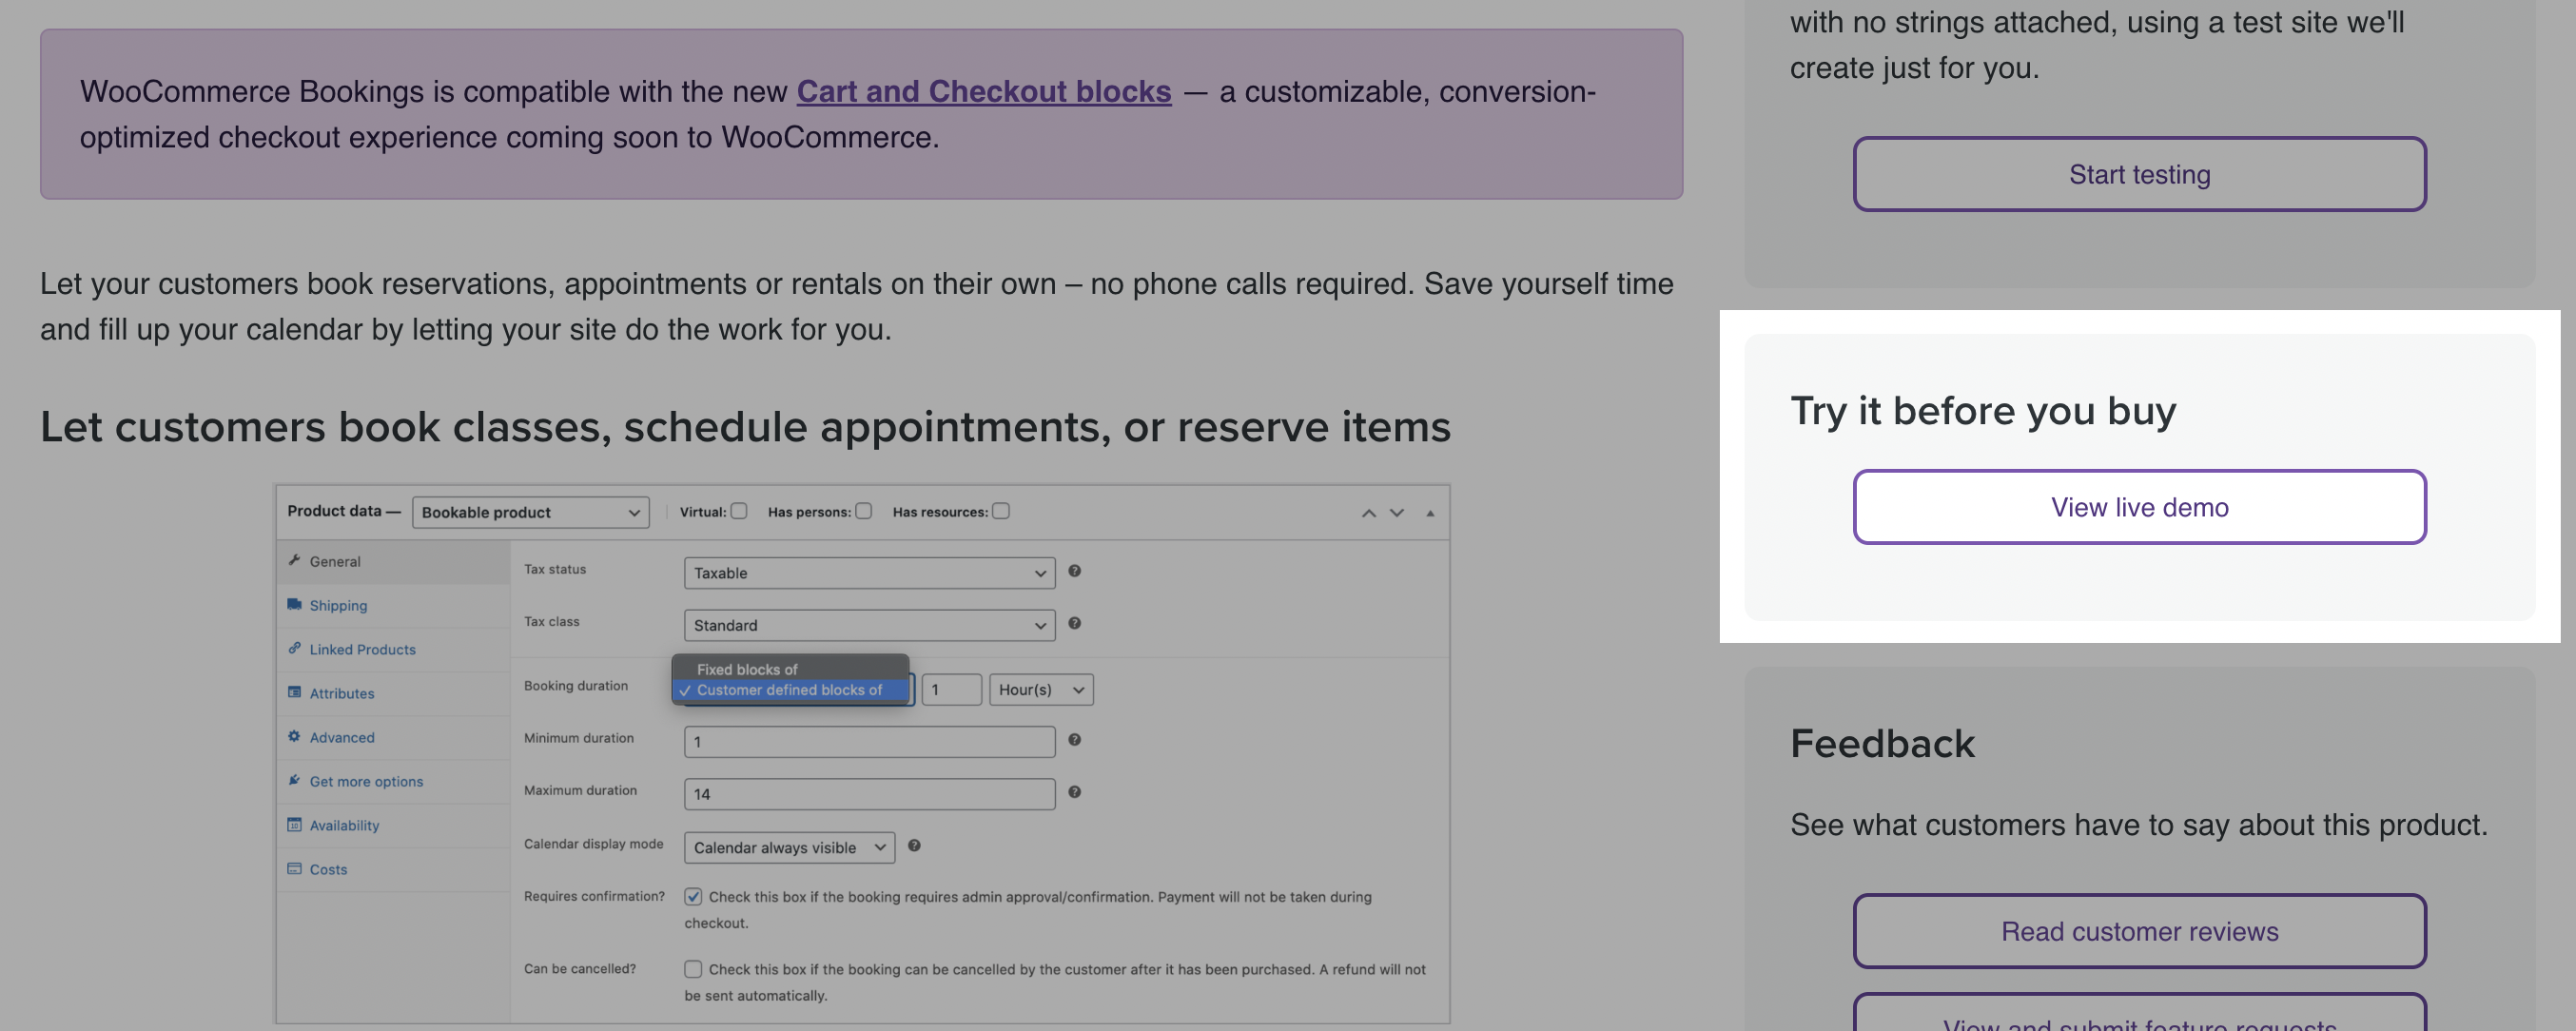 WooCommerce extension demo.png